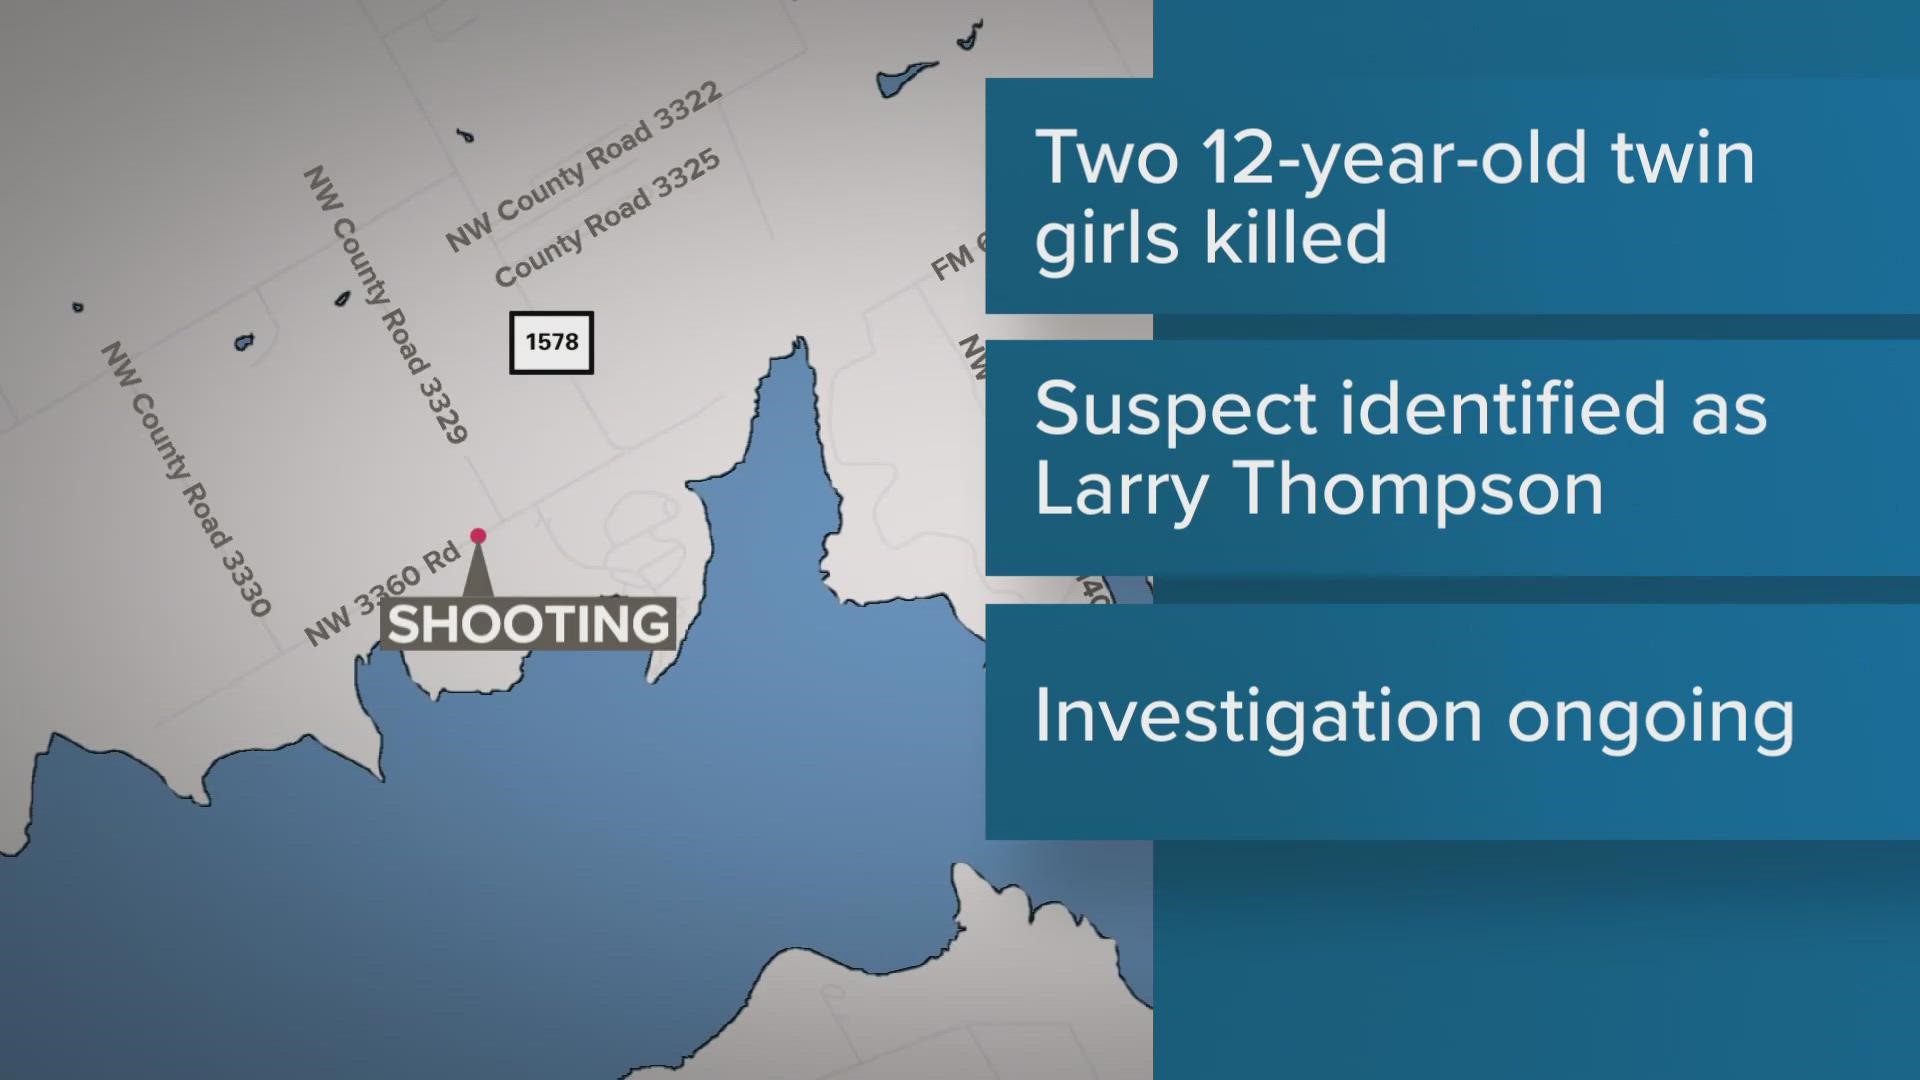 Navarro County Sheriff's Deputies reportedly found the bodies of two young girls and their father after a welfare concern call.